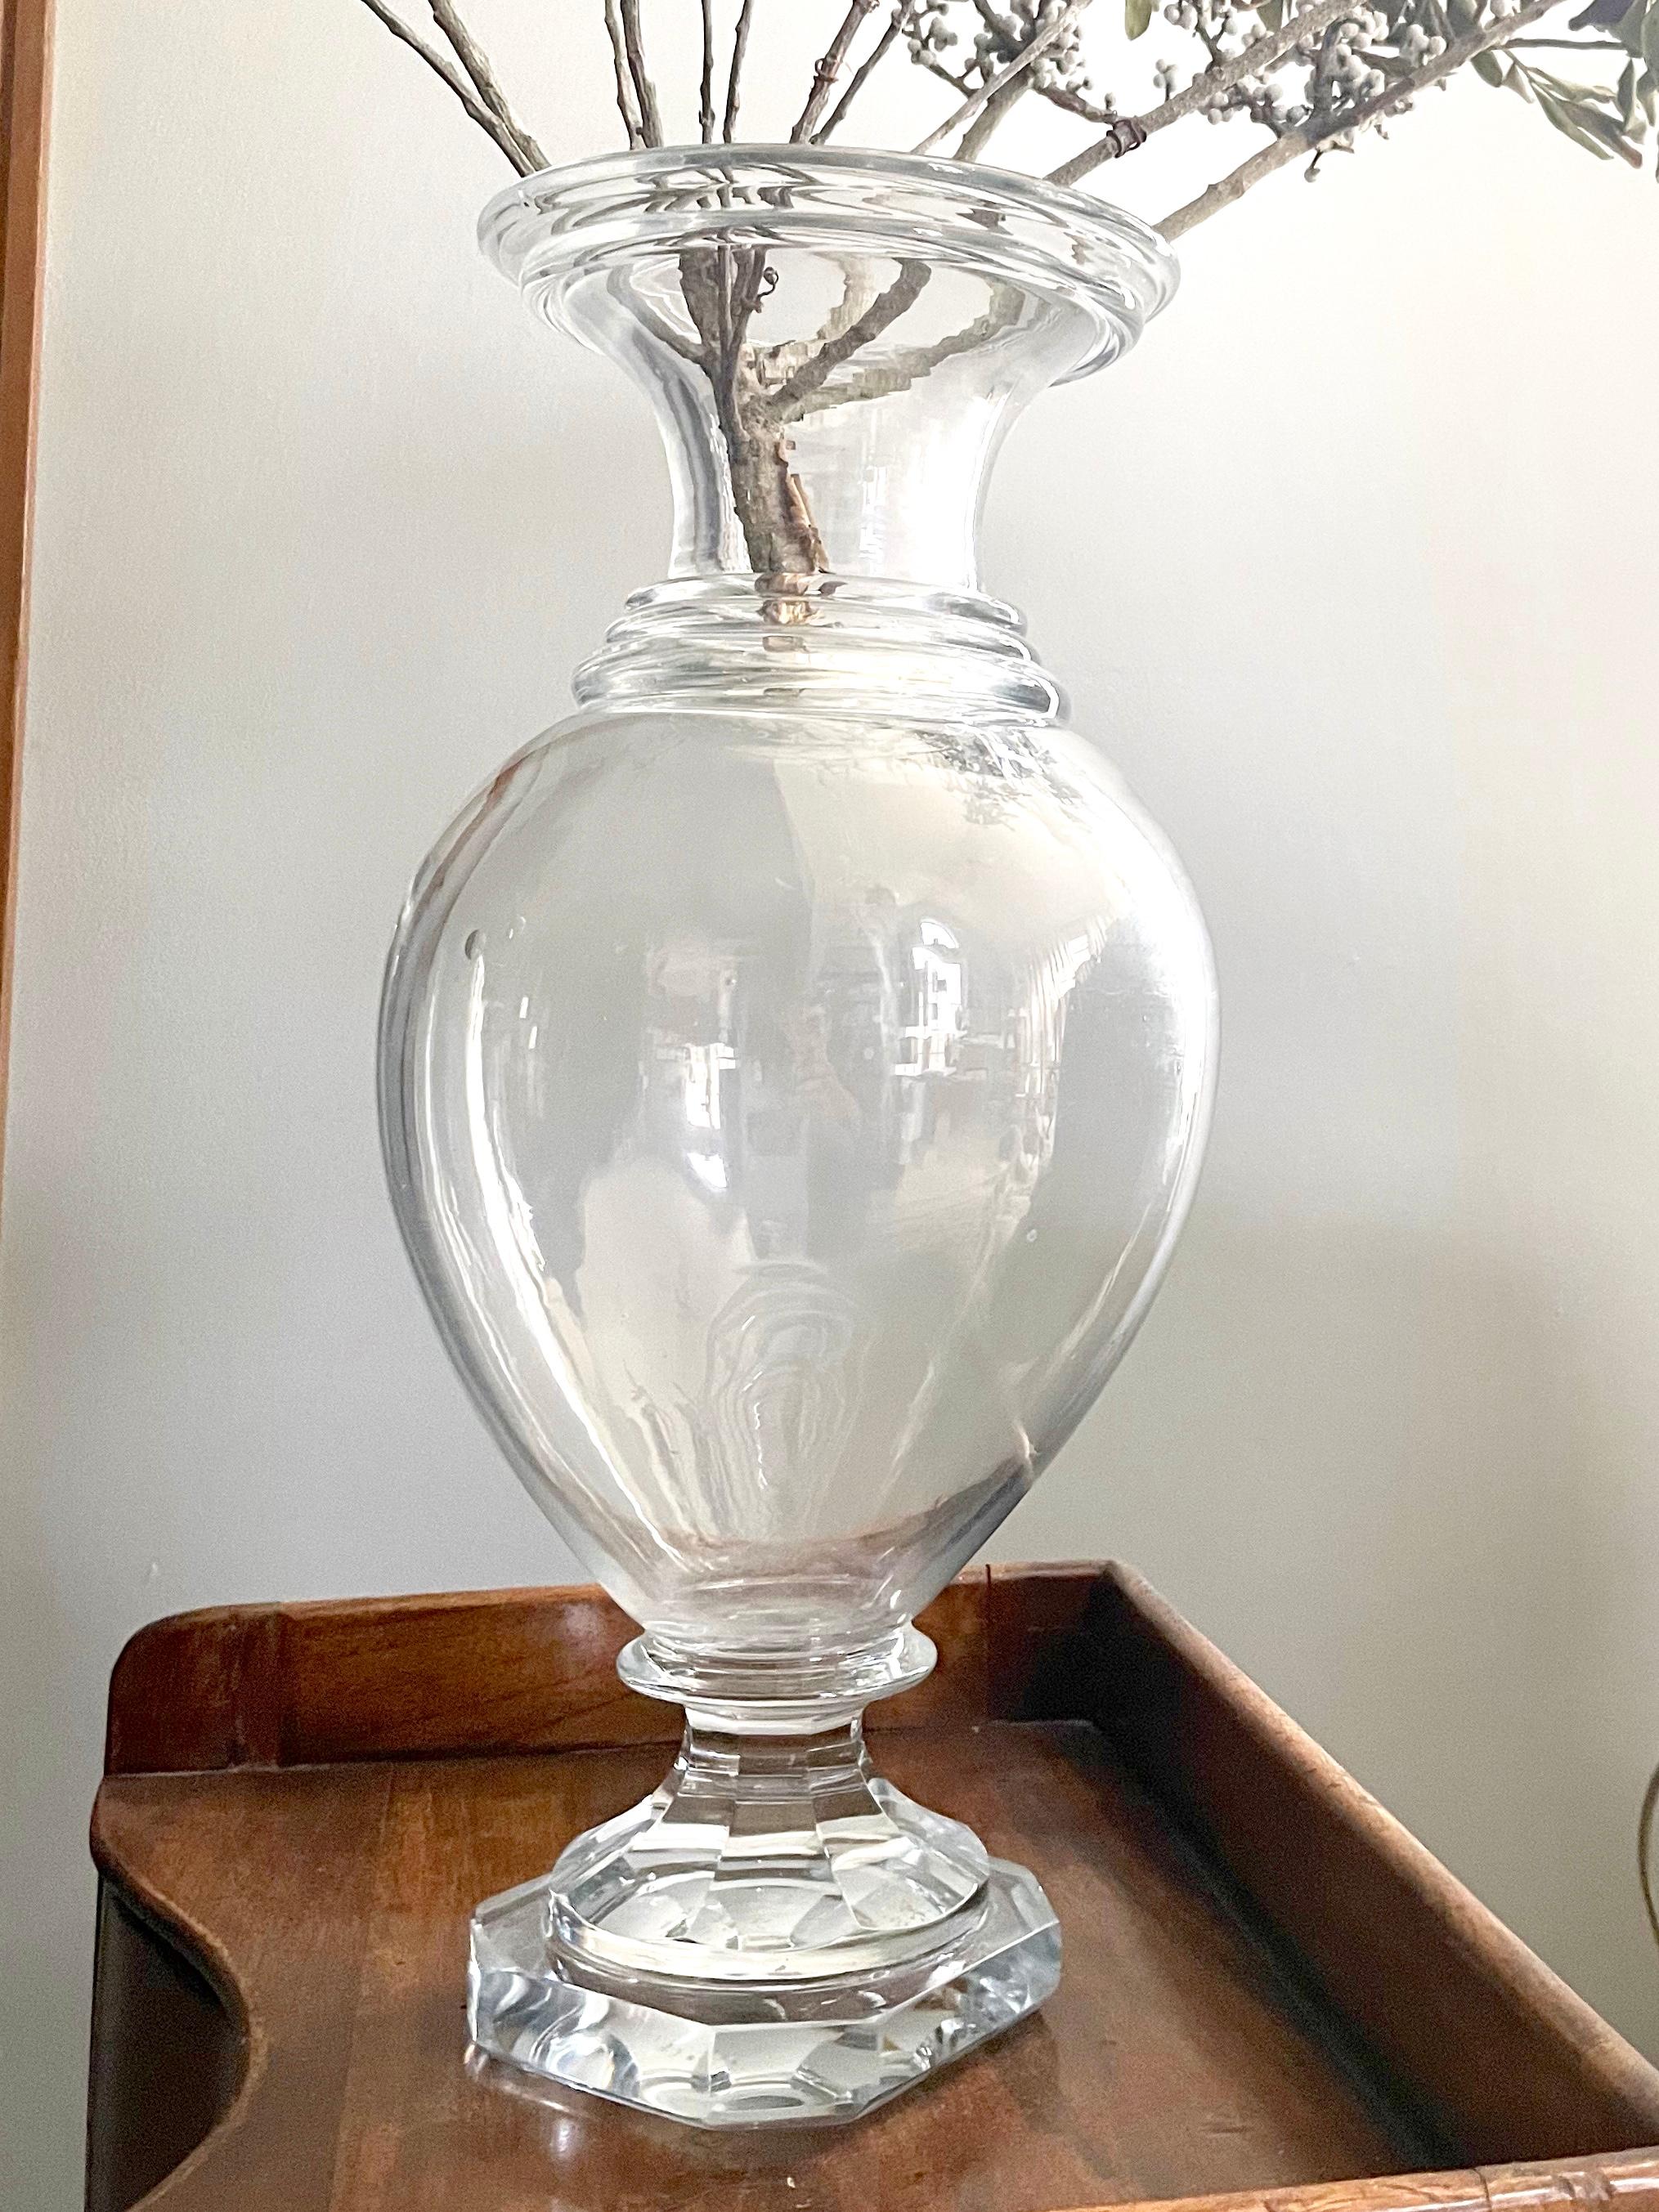 Antique Bacarat crystal vase. Baluster form neoclassical style tall French crystal vase with banded neck and rim with thick cut octagonal form base. France 1840’s
Dimensions:15.25” H x 7” diameter body; 6.38” diameter top & 4.38” diameter base.